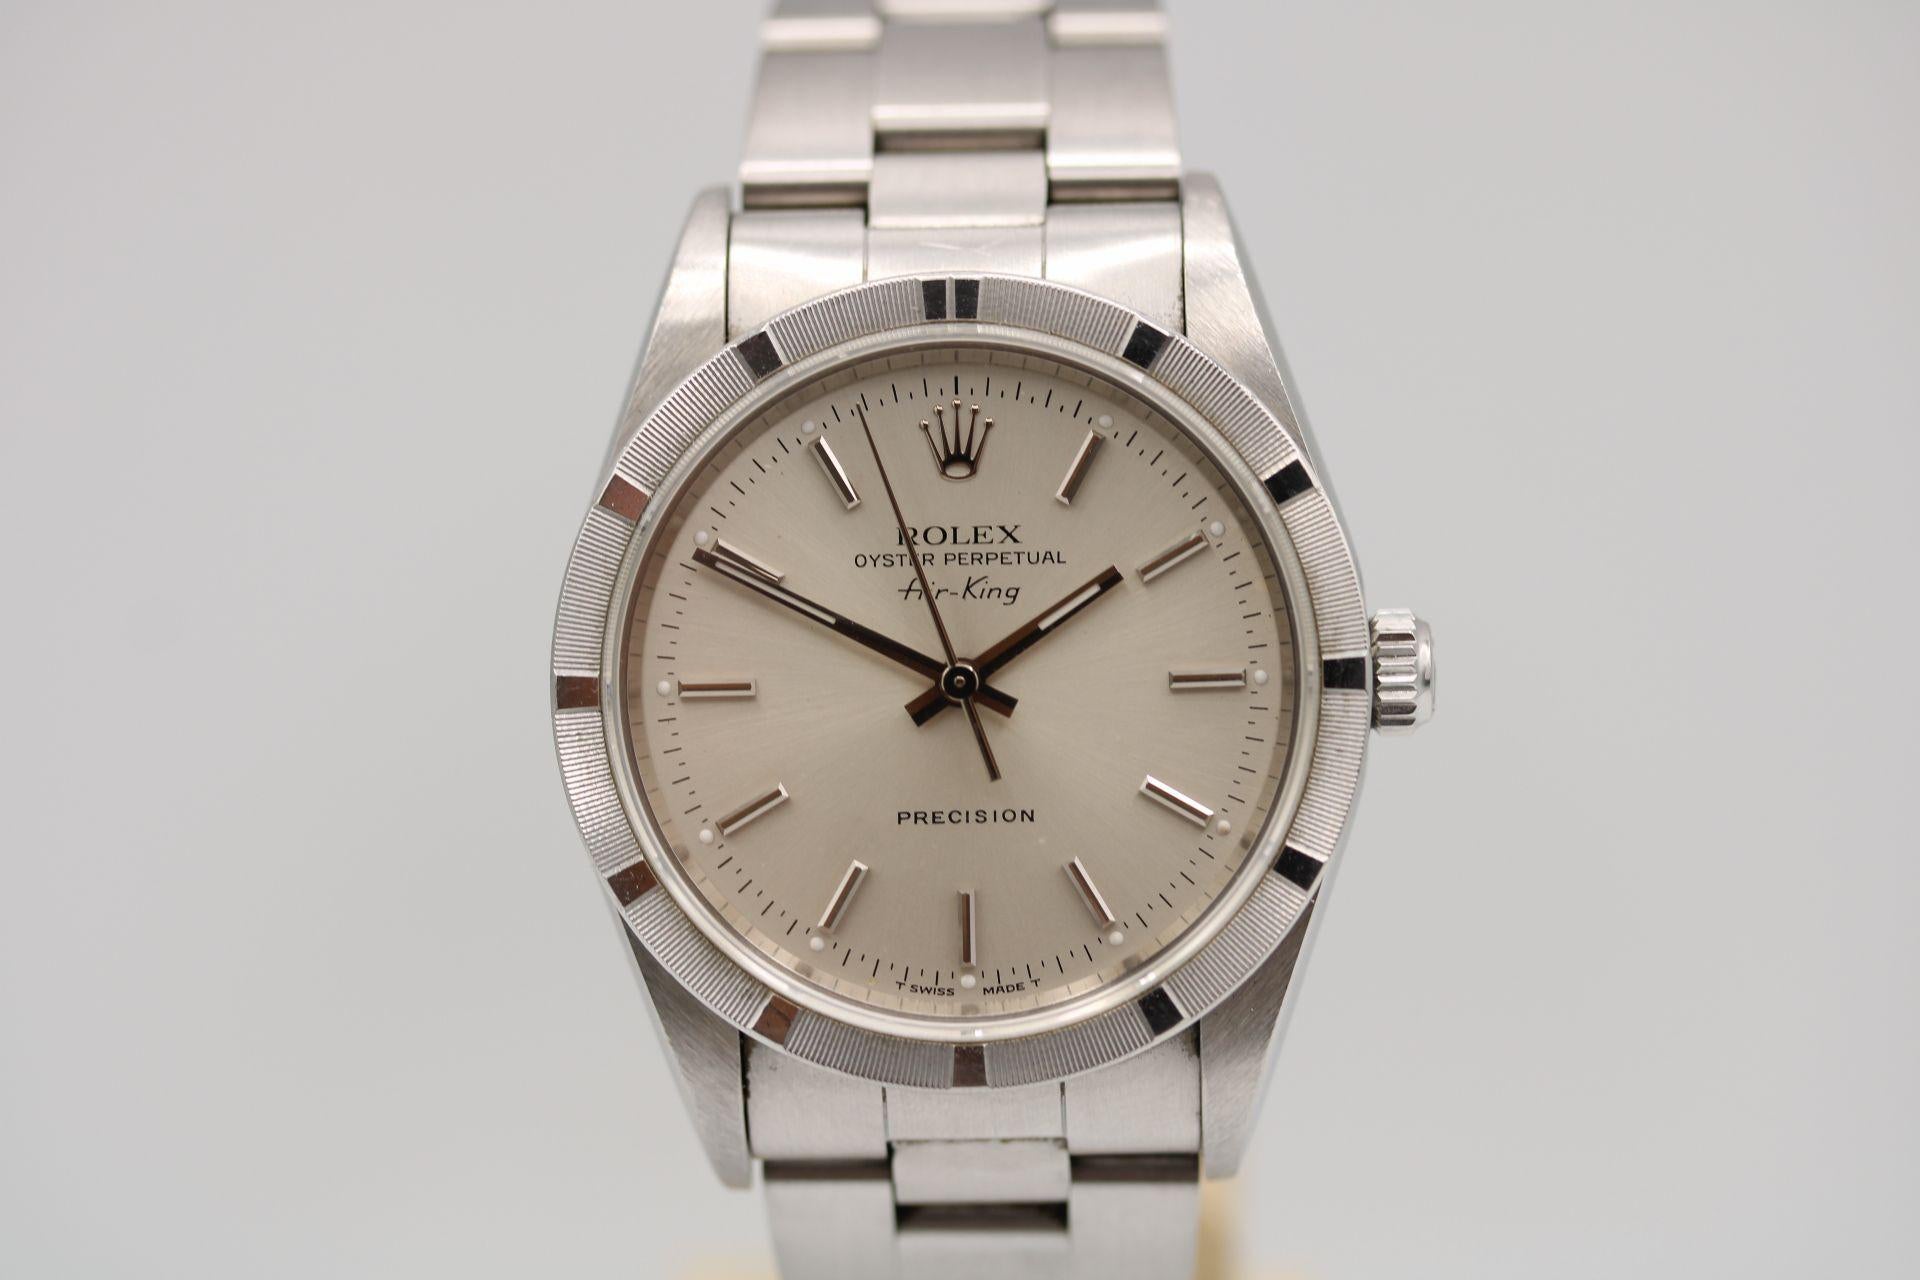 Watch: Rolex Air-King 14010 Full Set 1996
Stock Number: CHW5045
Price: £4,200.00

An immaculate full set consisting of both inner and outer boxes, manual, wallet, calendar, swing tags and papers dated 1996

The Rolex Air-King, model 14010, features